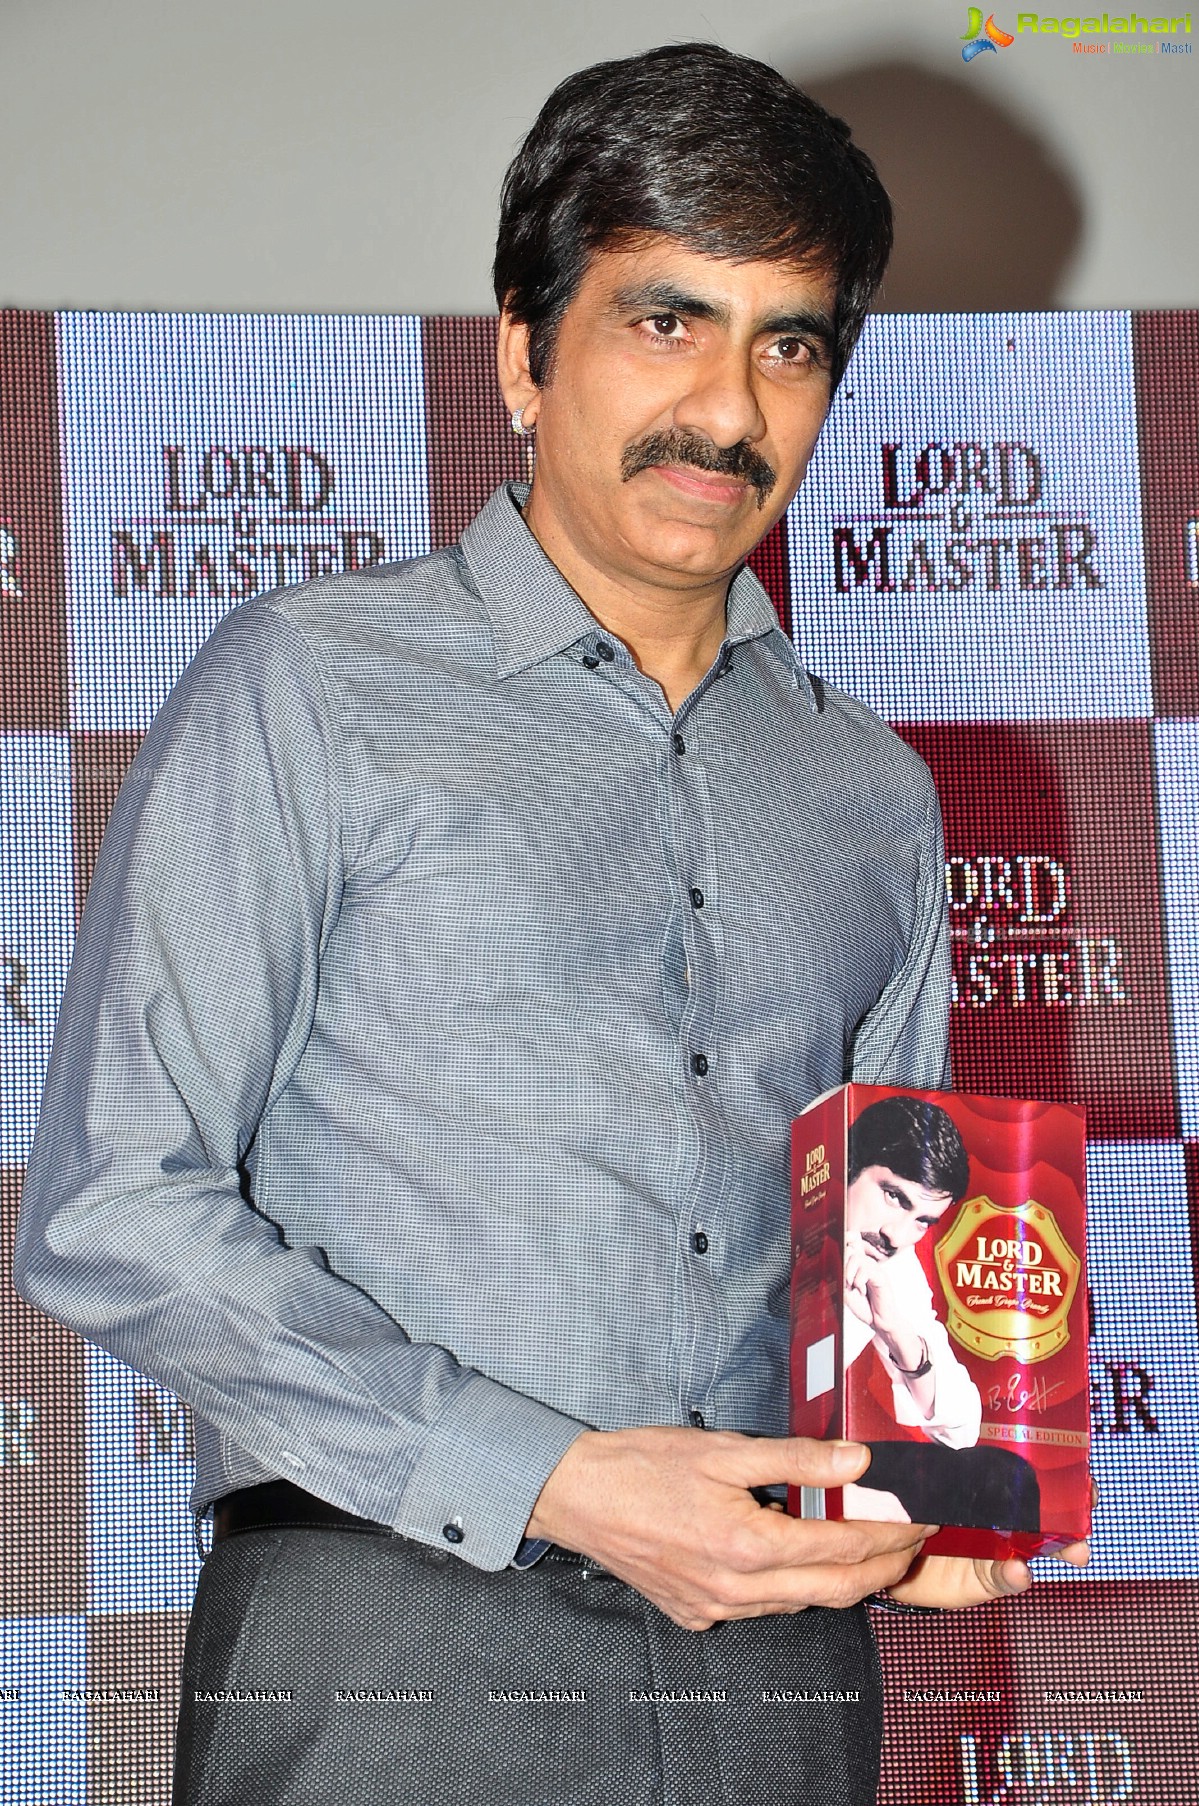 Lord & Master Meet and Greet with the Superstar Ravi Teja